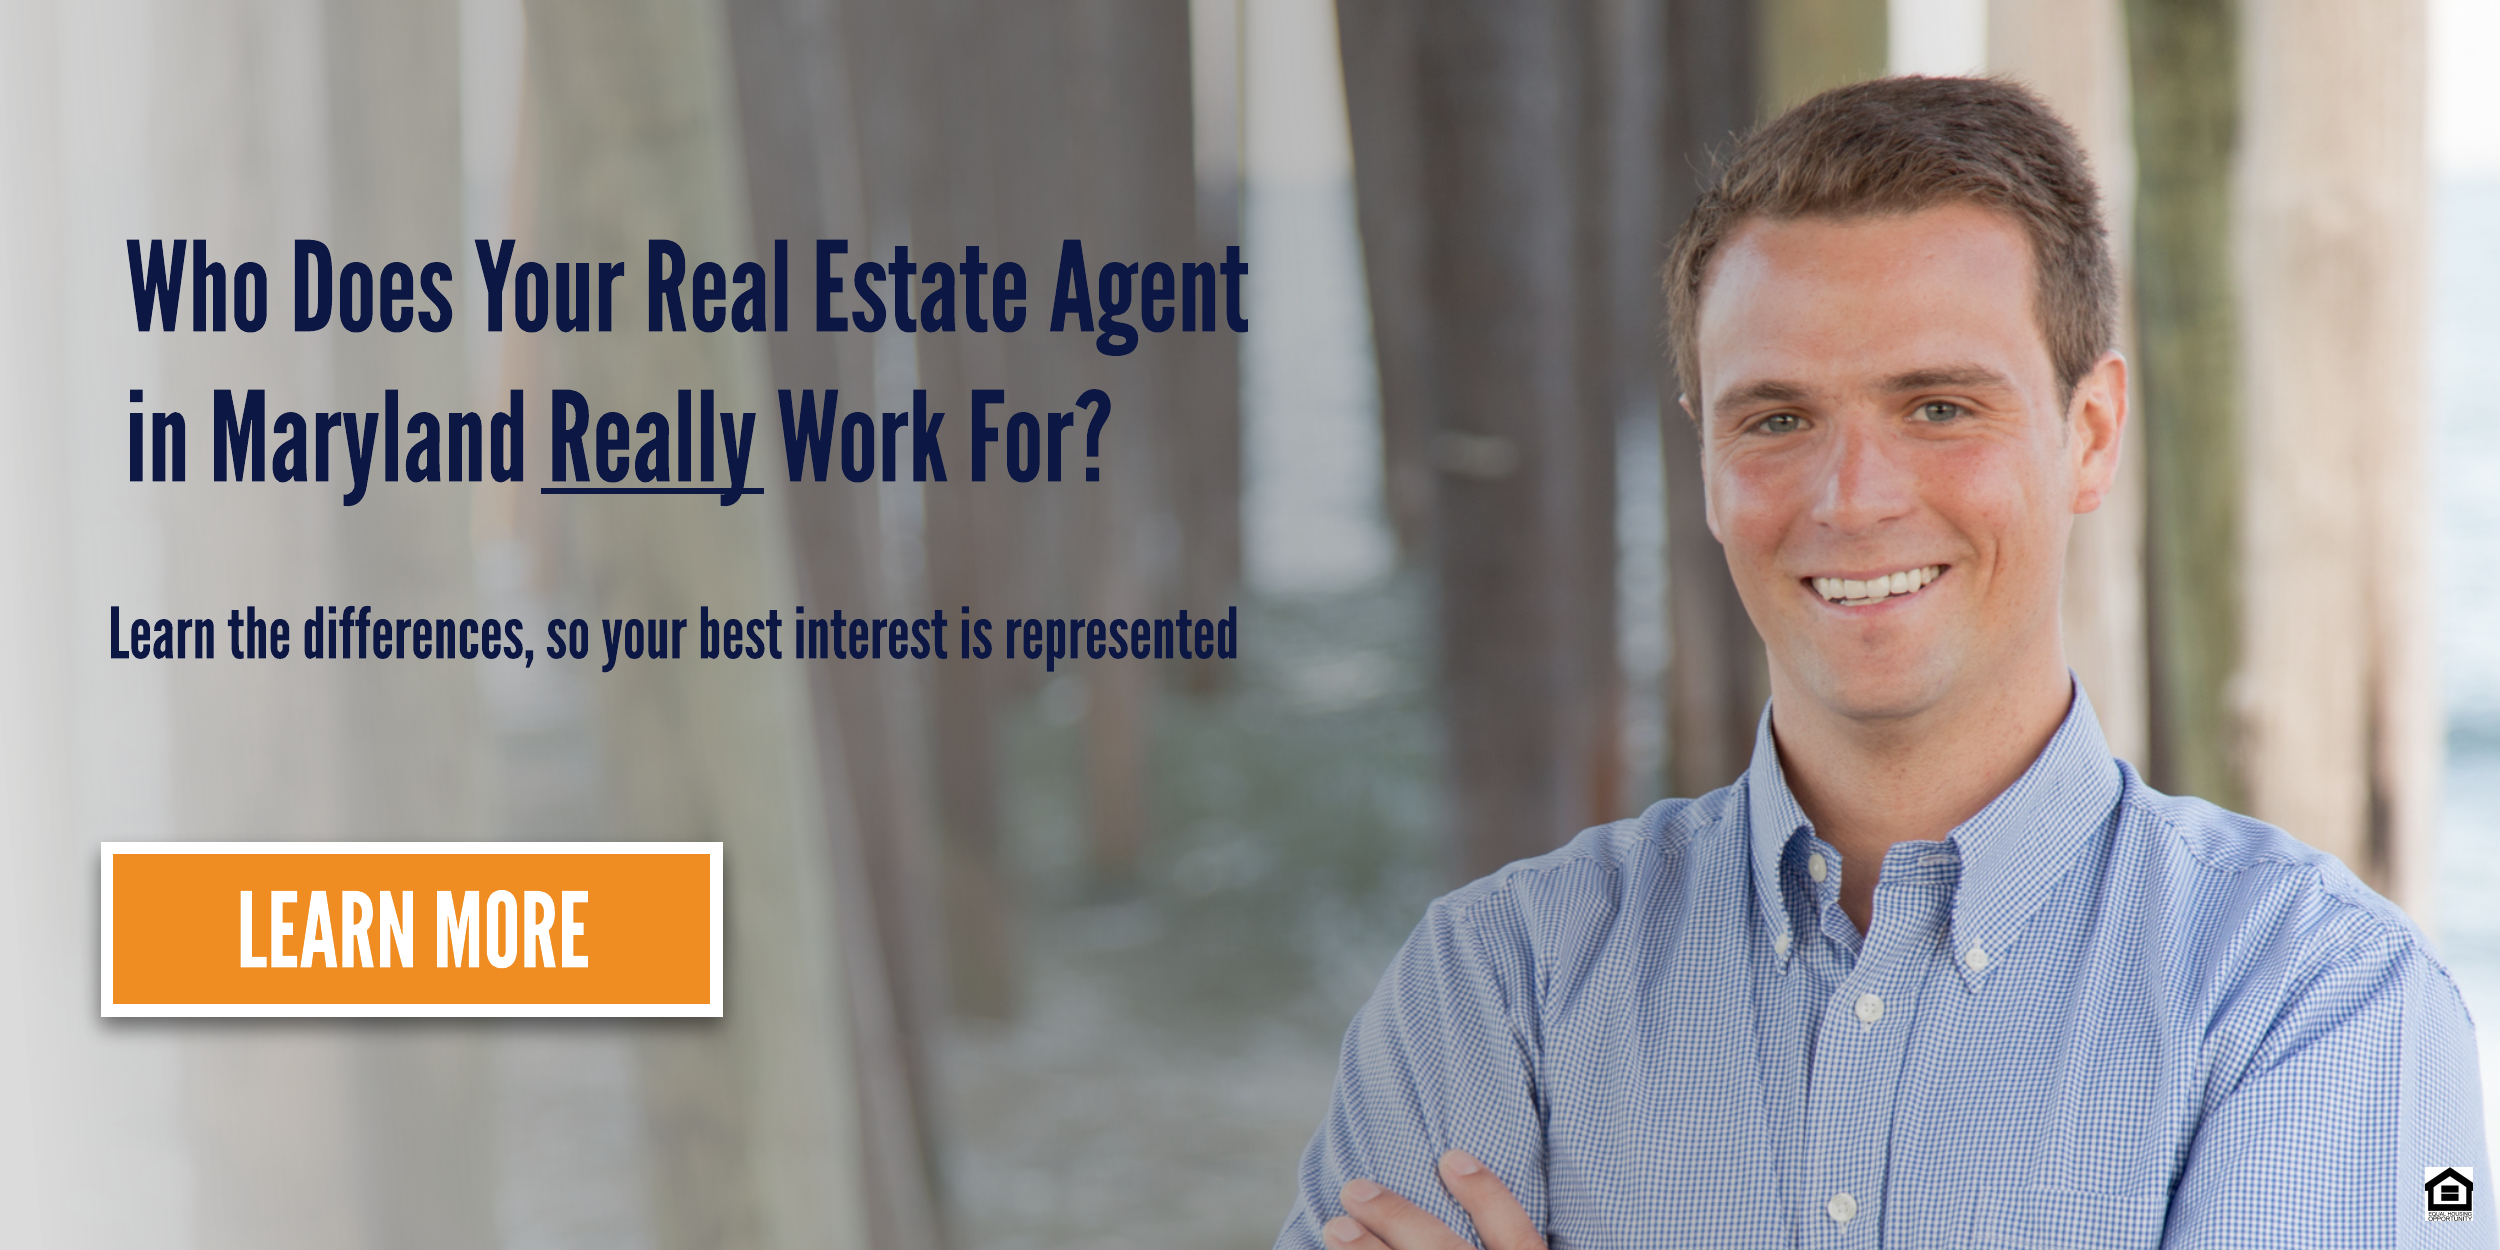 Who Does Your Real Estate Agent in Maryland Really Work For?